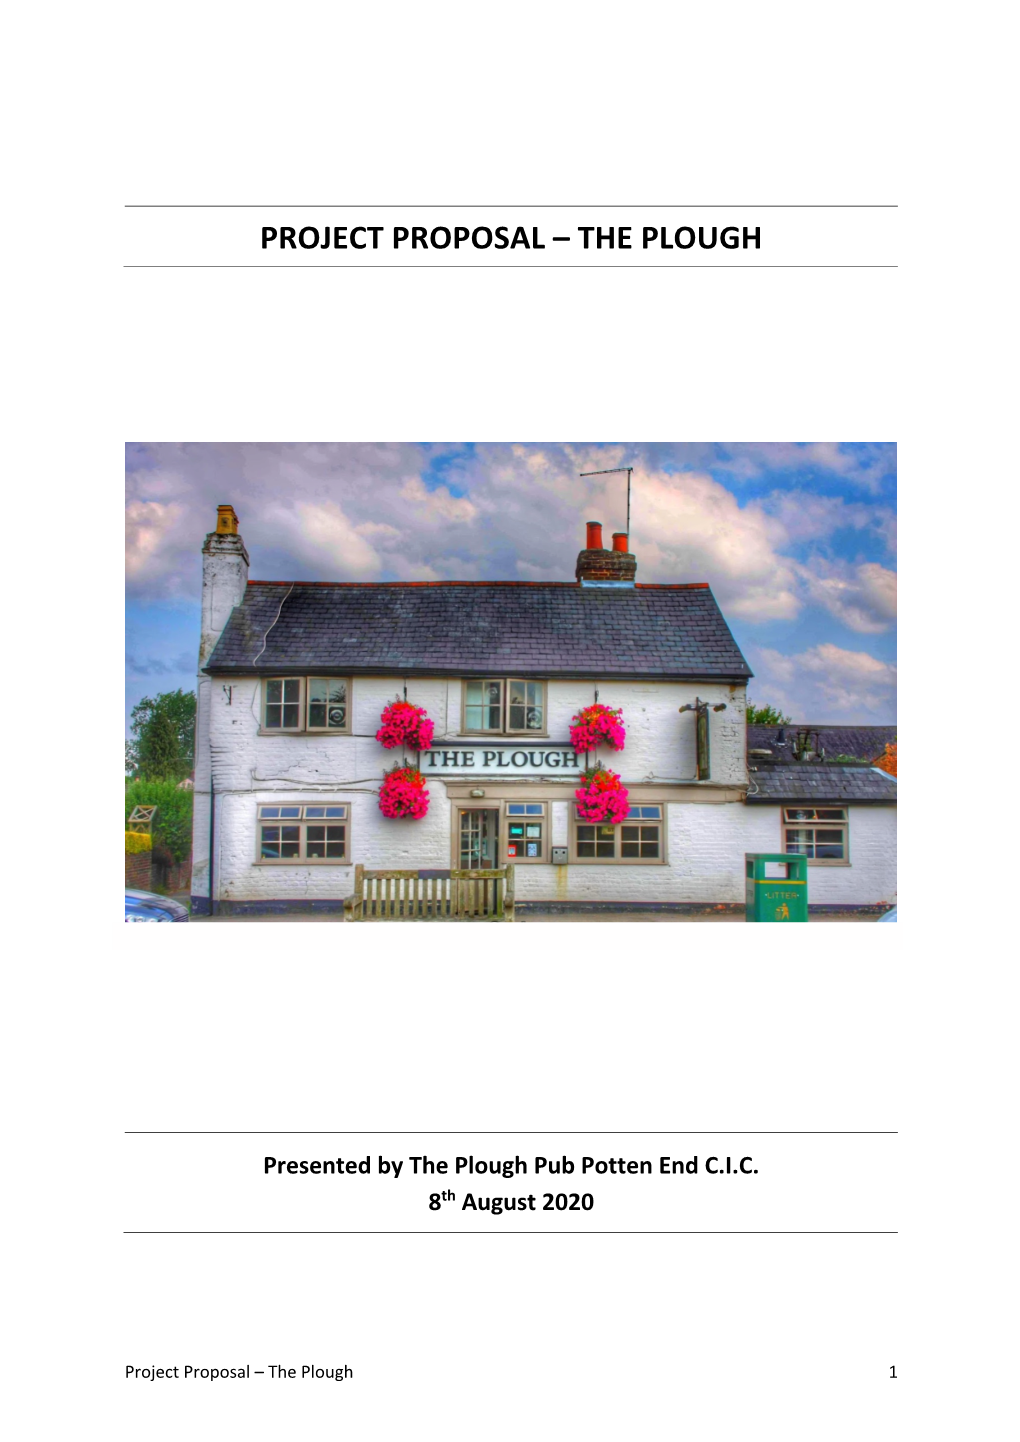 Project Proposal – the Plough